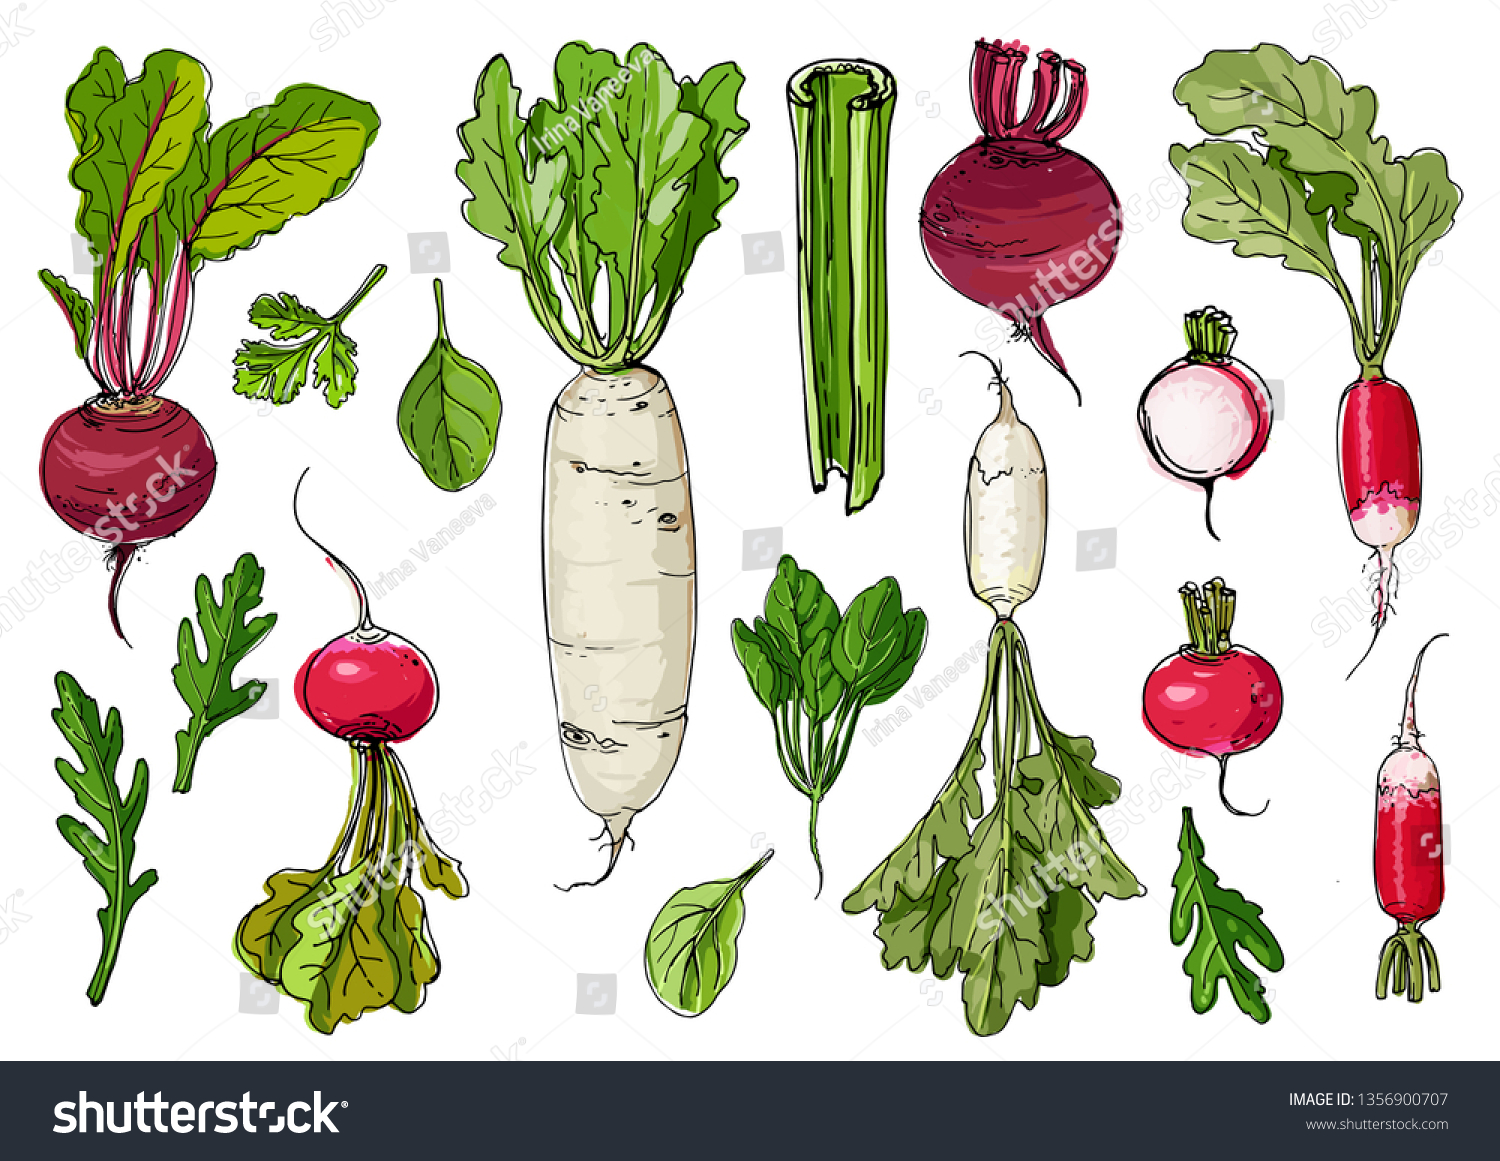 Daikon radish,celery, arugula, spinach,  beet drawn by a line on a white background. A sketch of food. Vector drawing #1356900707